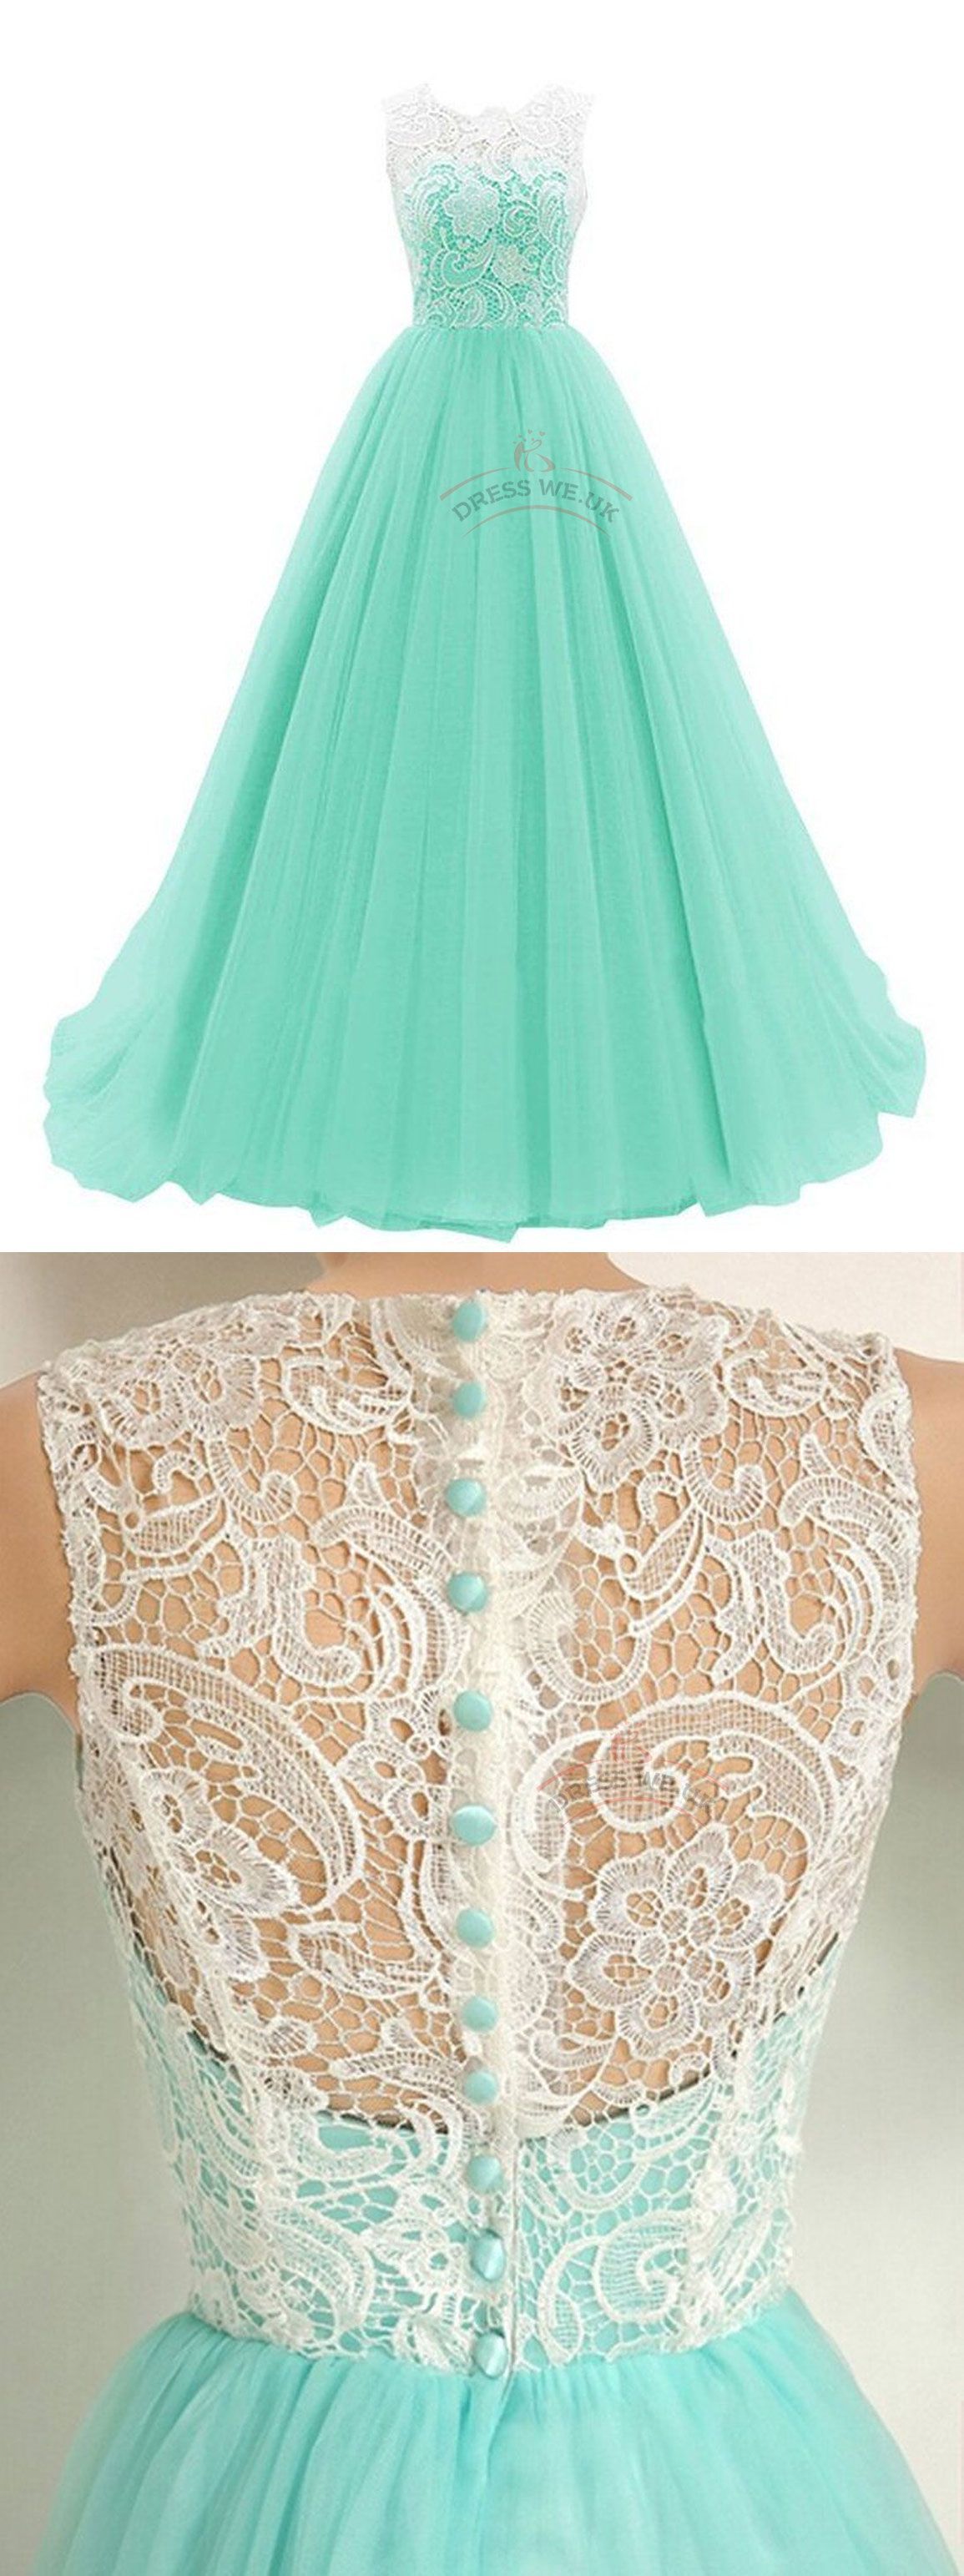 Elegant Mint Prom Dresses,Ruched Lace Prom Dresses,Sleeveless Prom Dresses, Long Prom Dresses,Prom Gowns